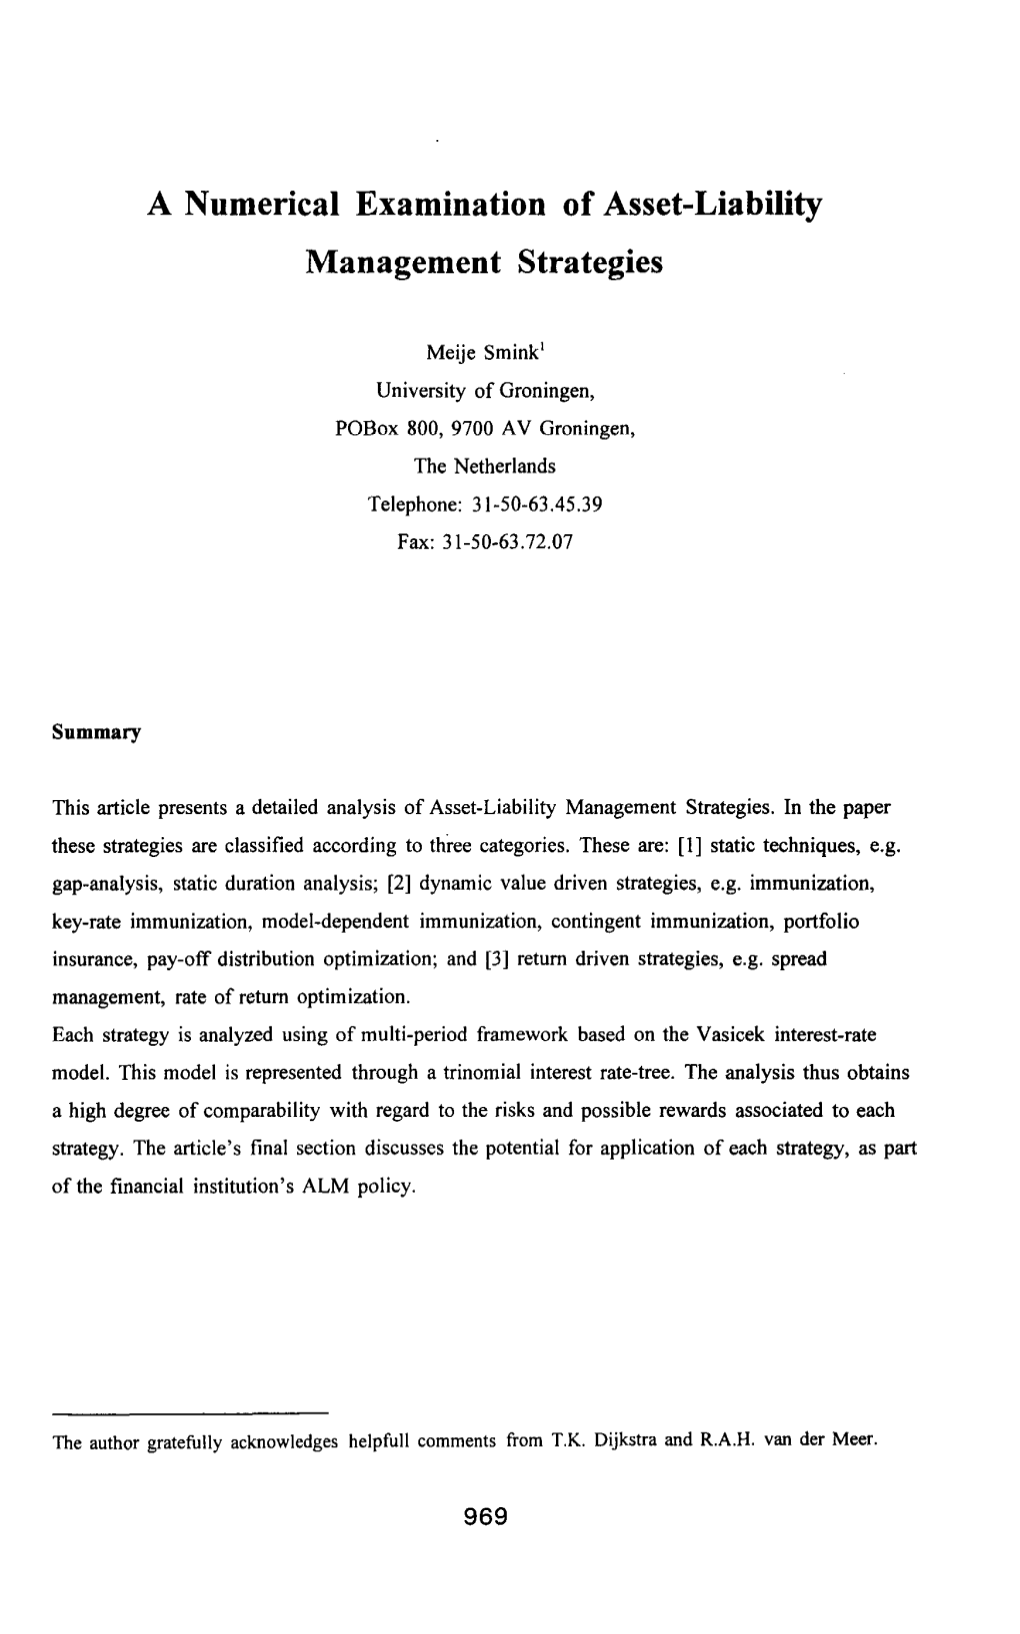 A Numerical Examination of Asset-Liability Management Strategies